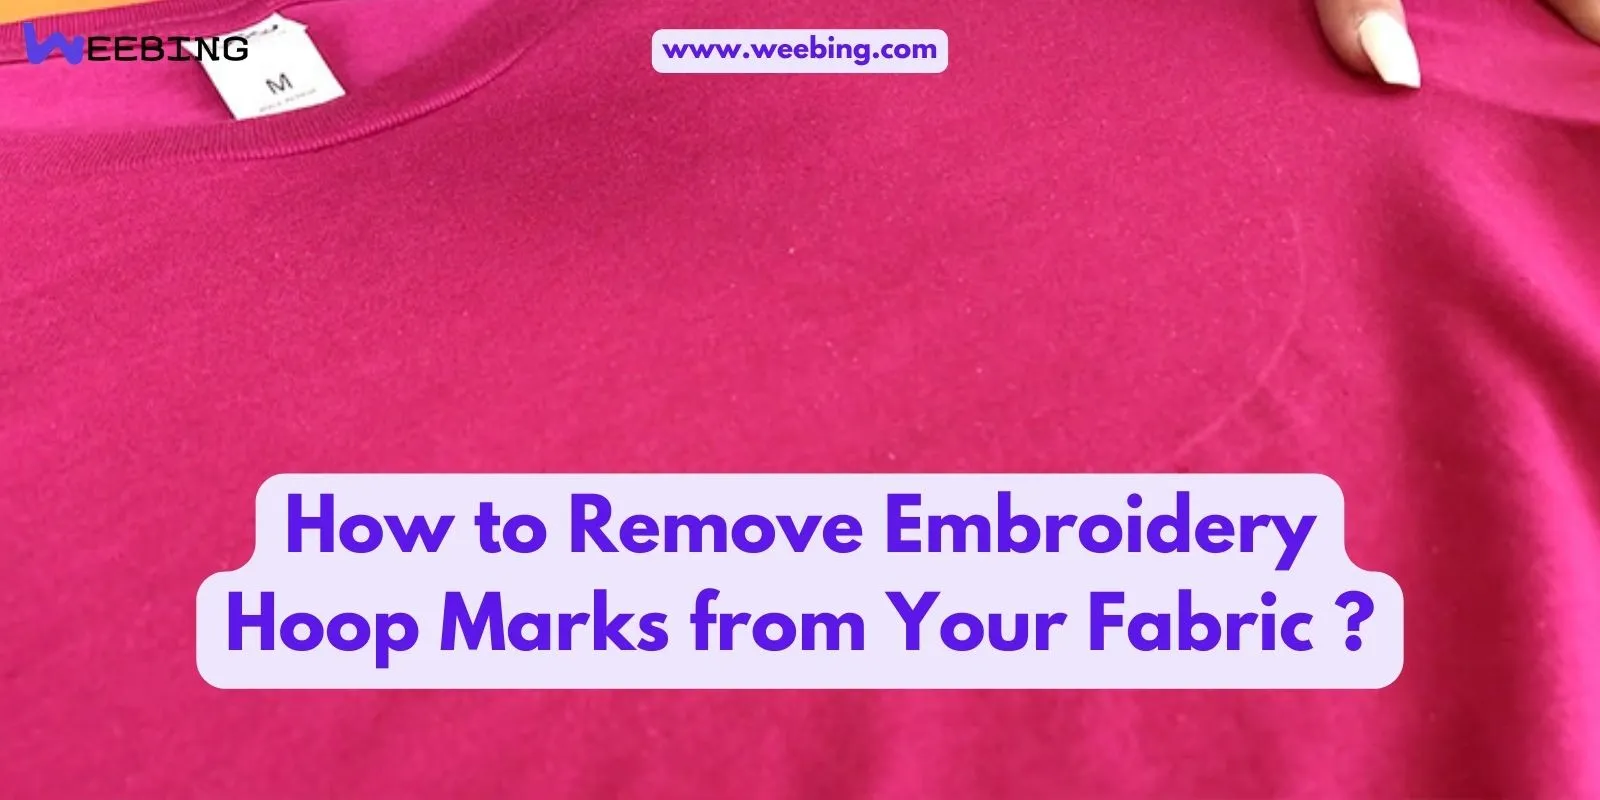 Remove Embroidery Hoop Marks from Your Fabric